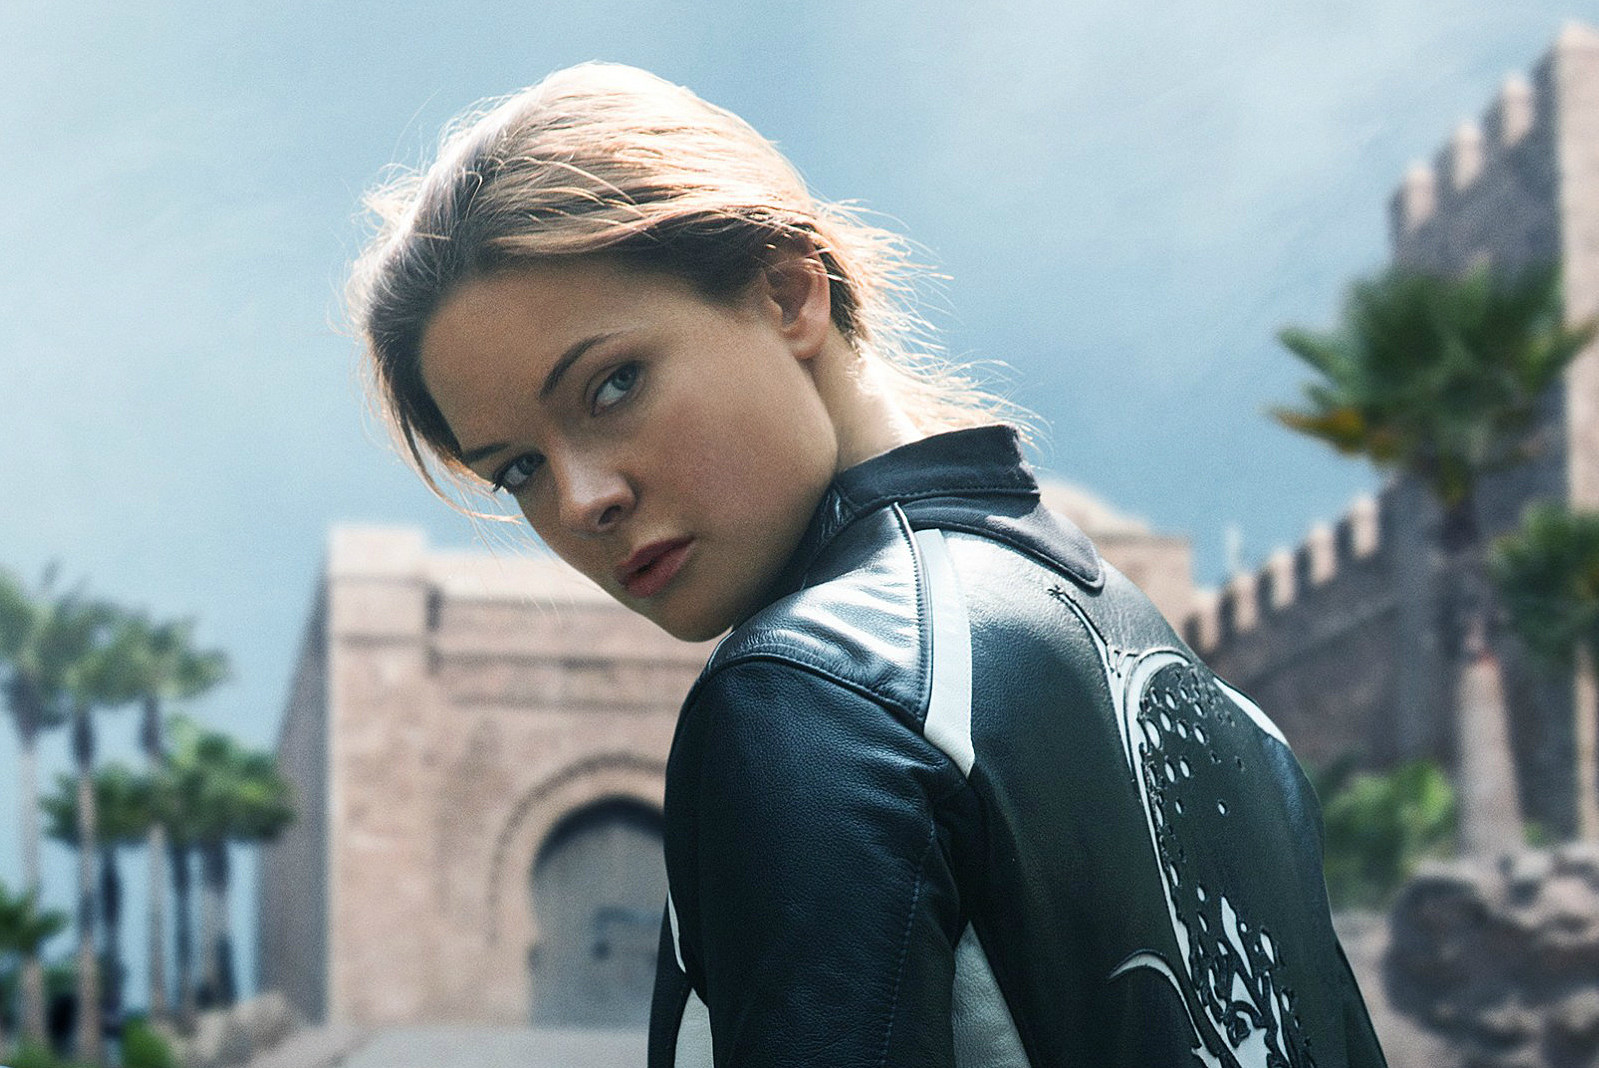 Squad Up: Here's the Female Cast of 'Mission: Impossible 6'